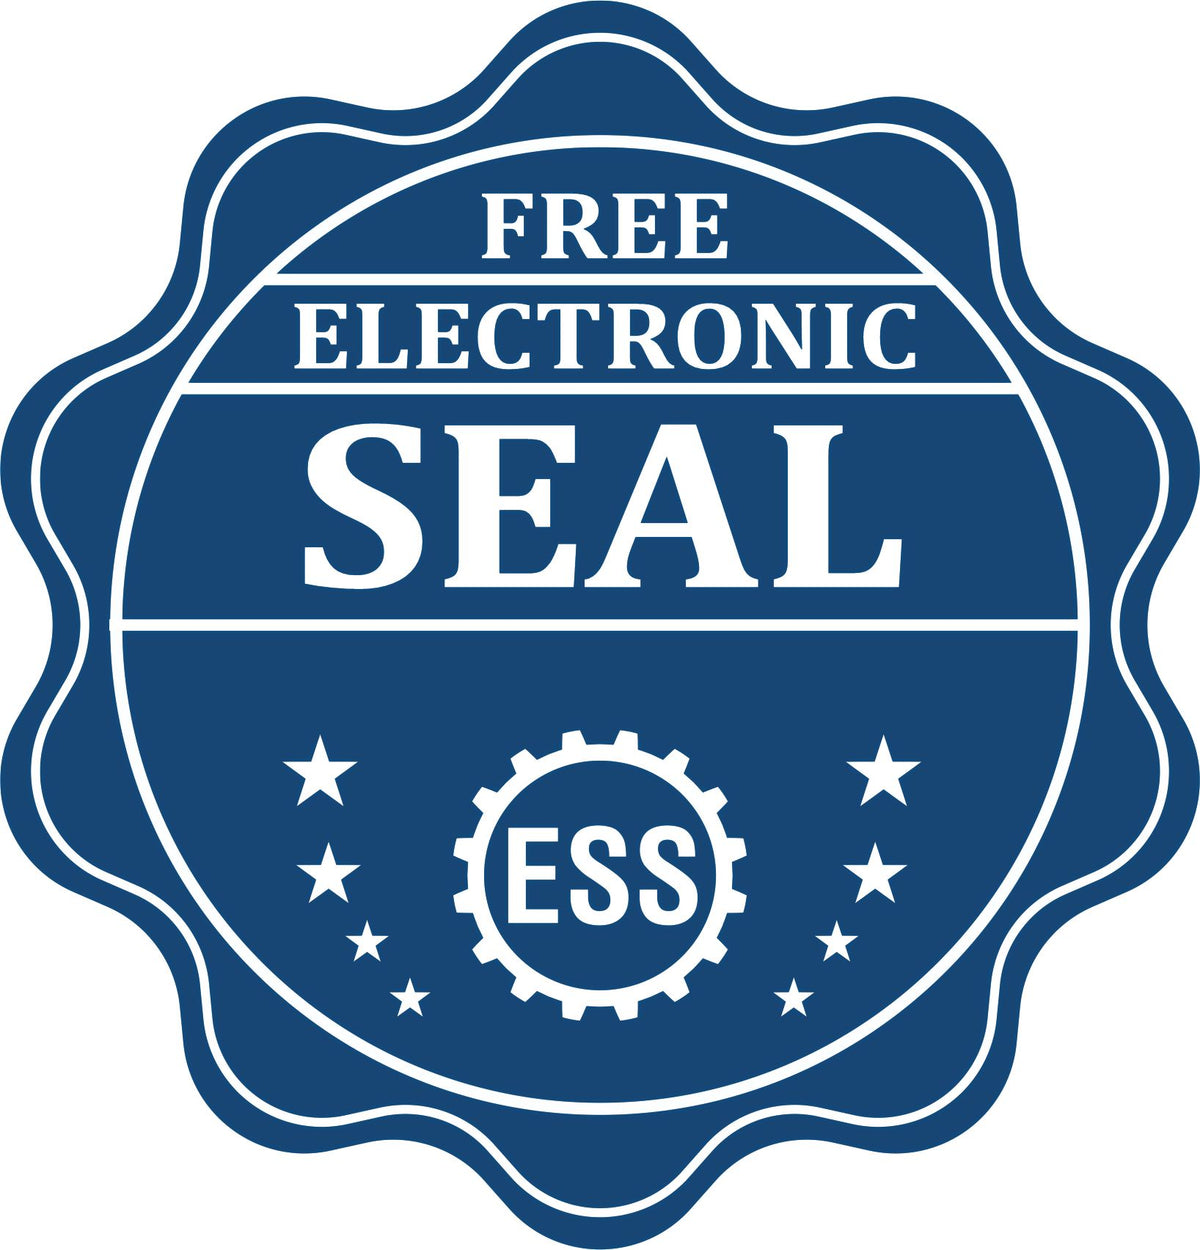 A badge showing a free electronic seal for the Long Reach Nevada Geology Seal with stars and the ESS gear on the emblem.